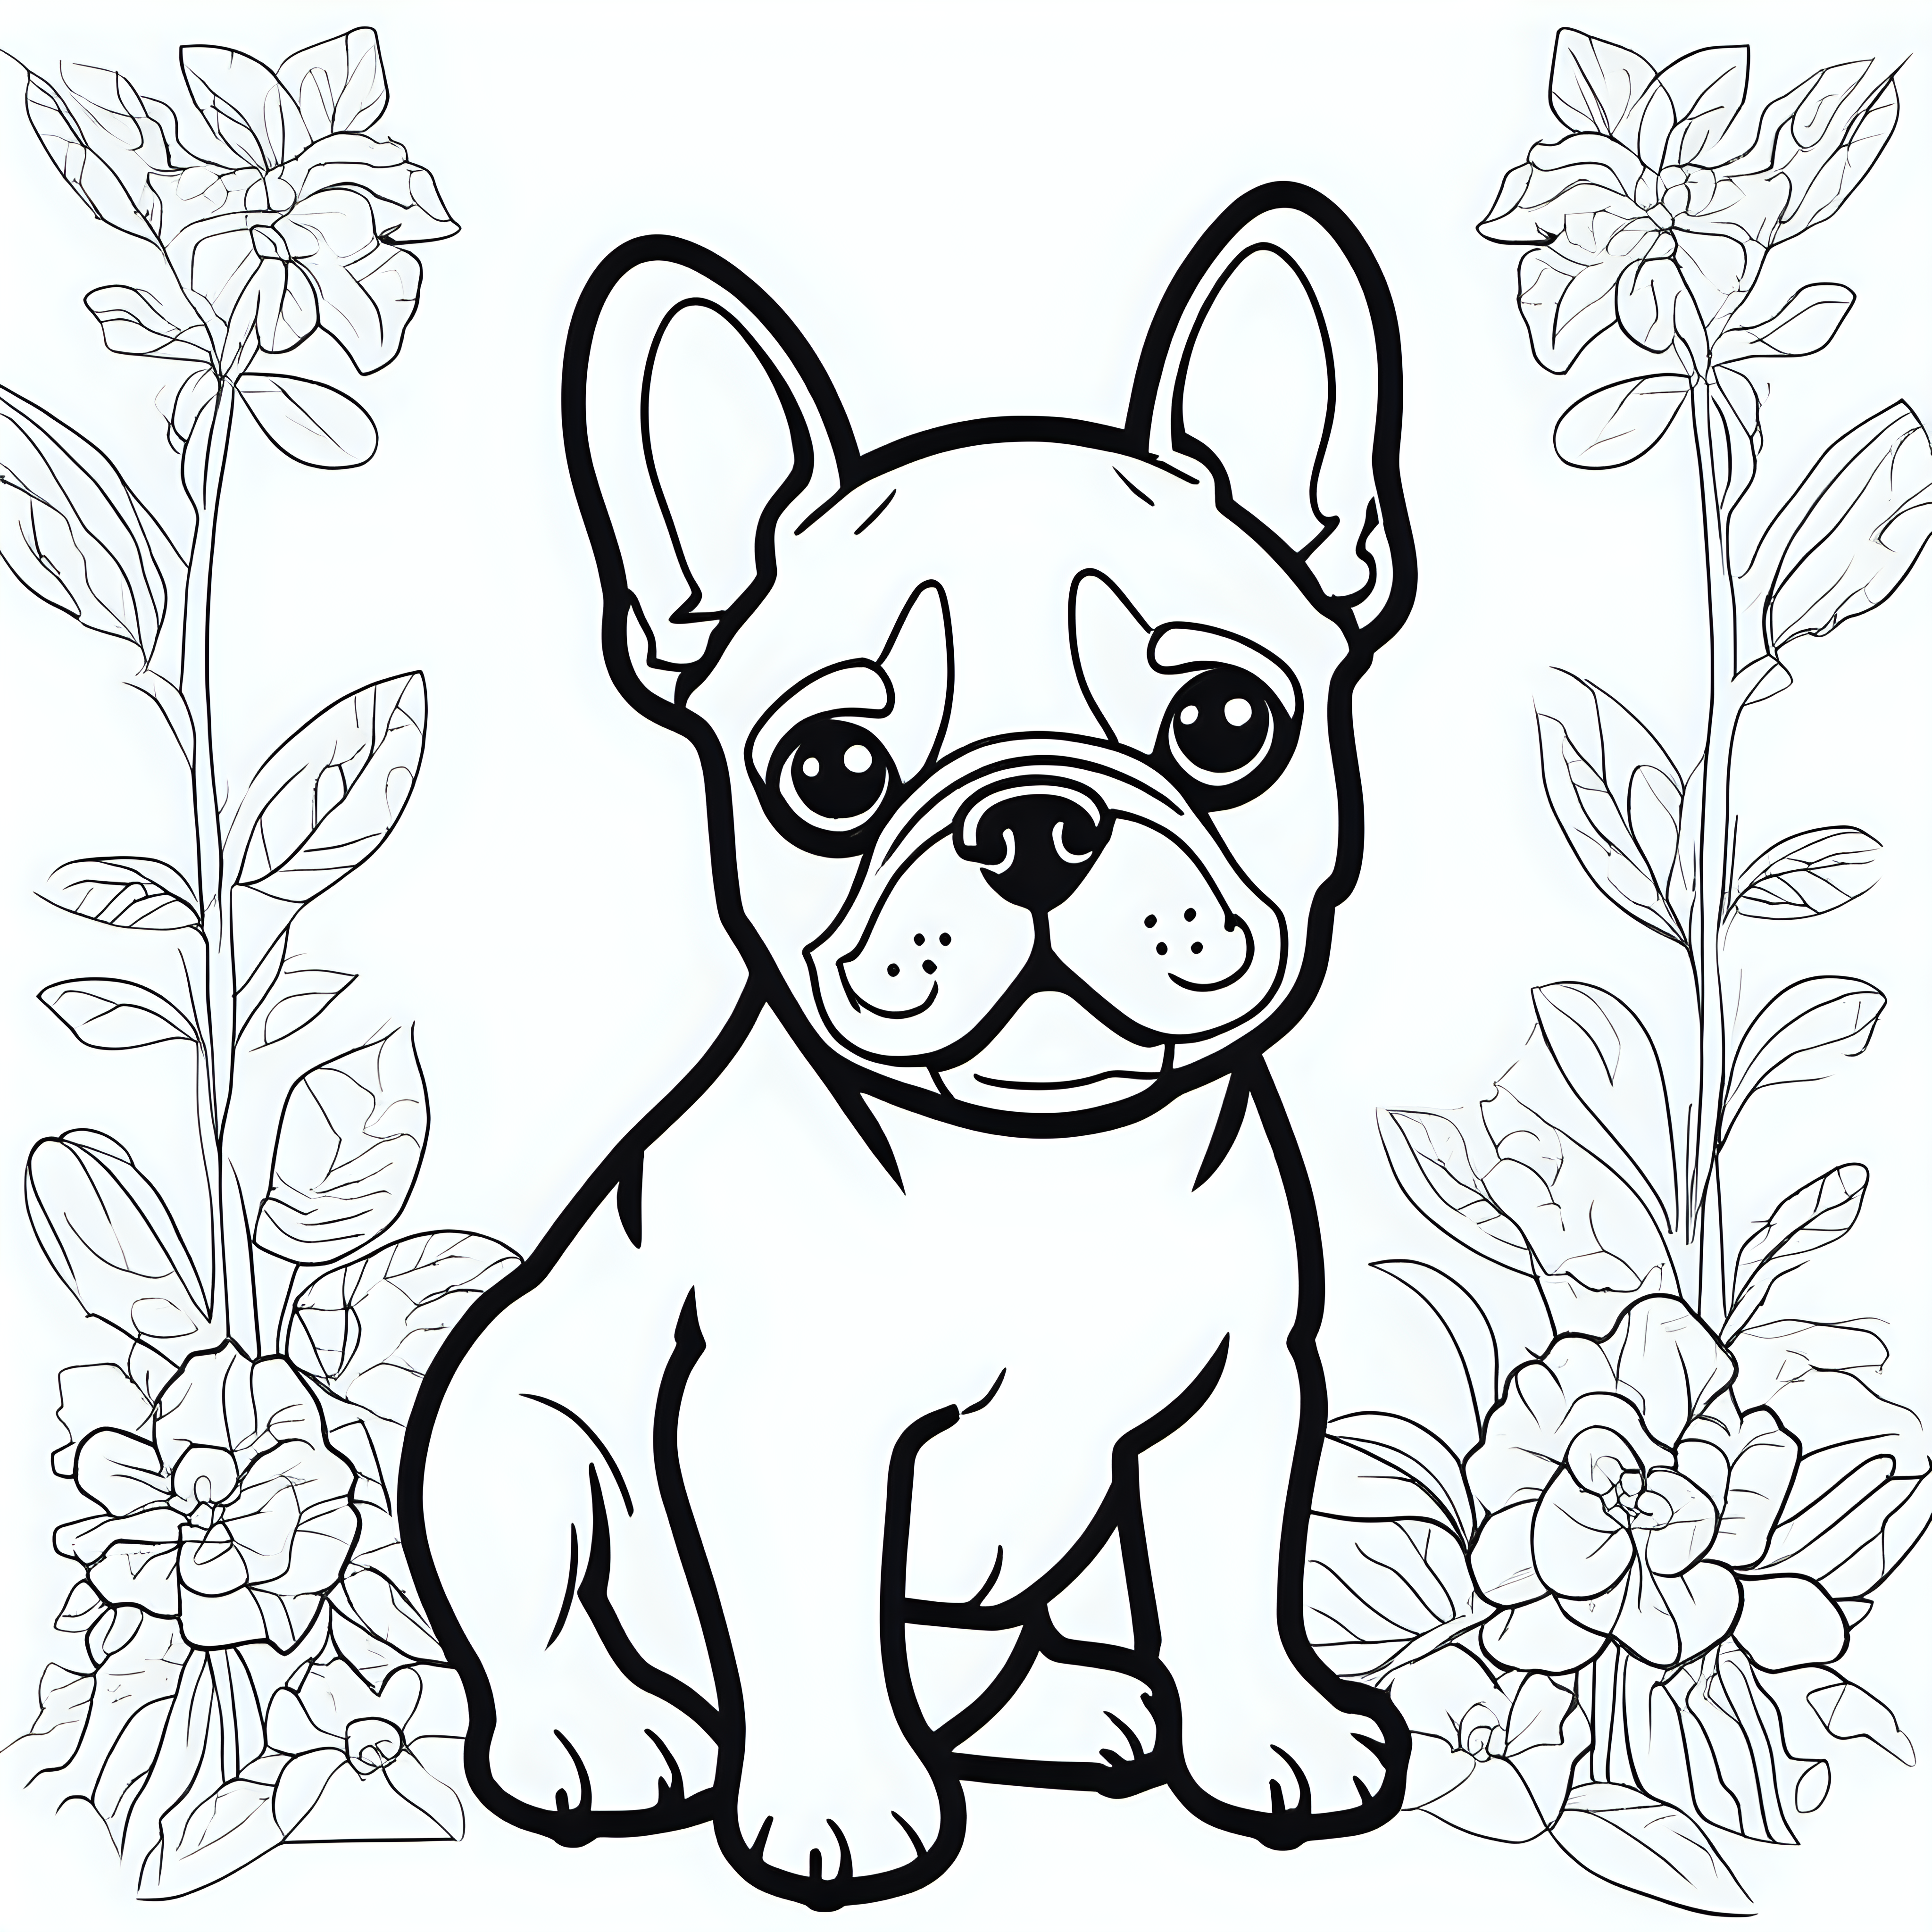 Craft a delightful black outline of a cute